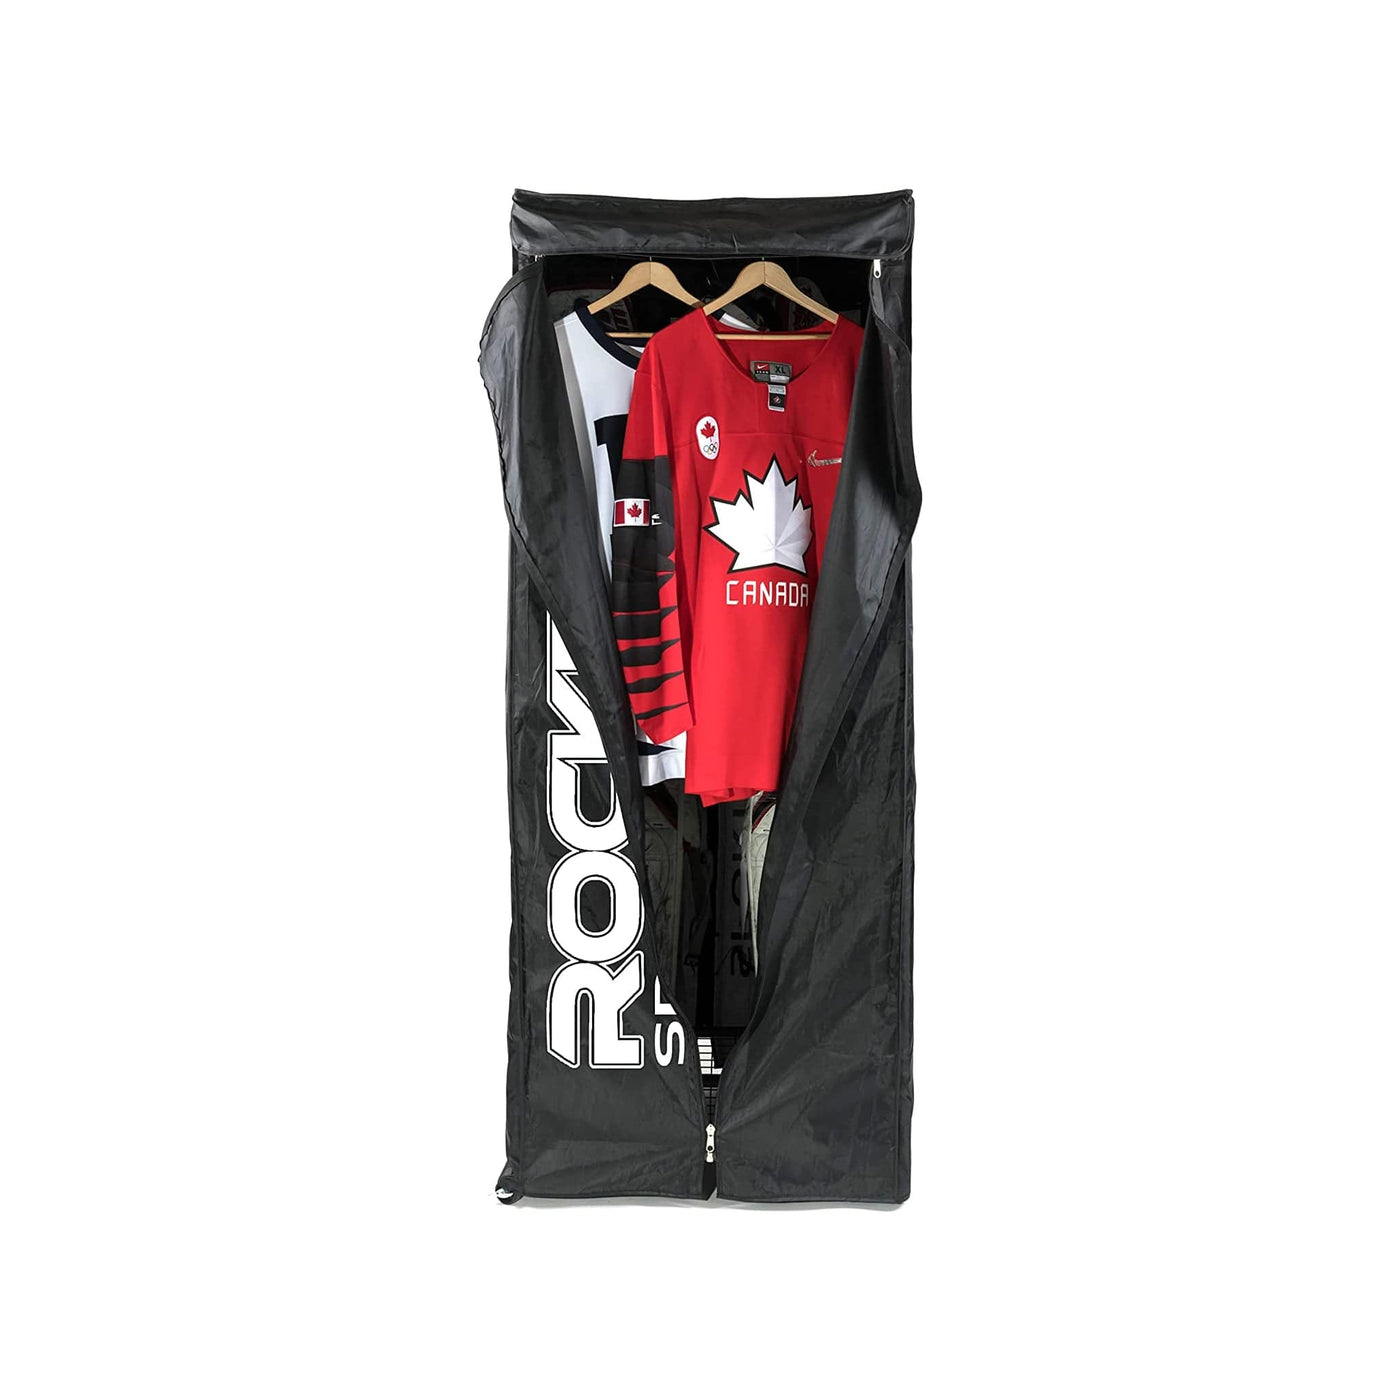 Rocket Dryer Sport Stall Dryer - The Hockey Shop Source For Sports